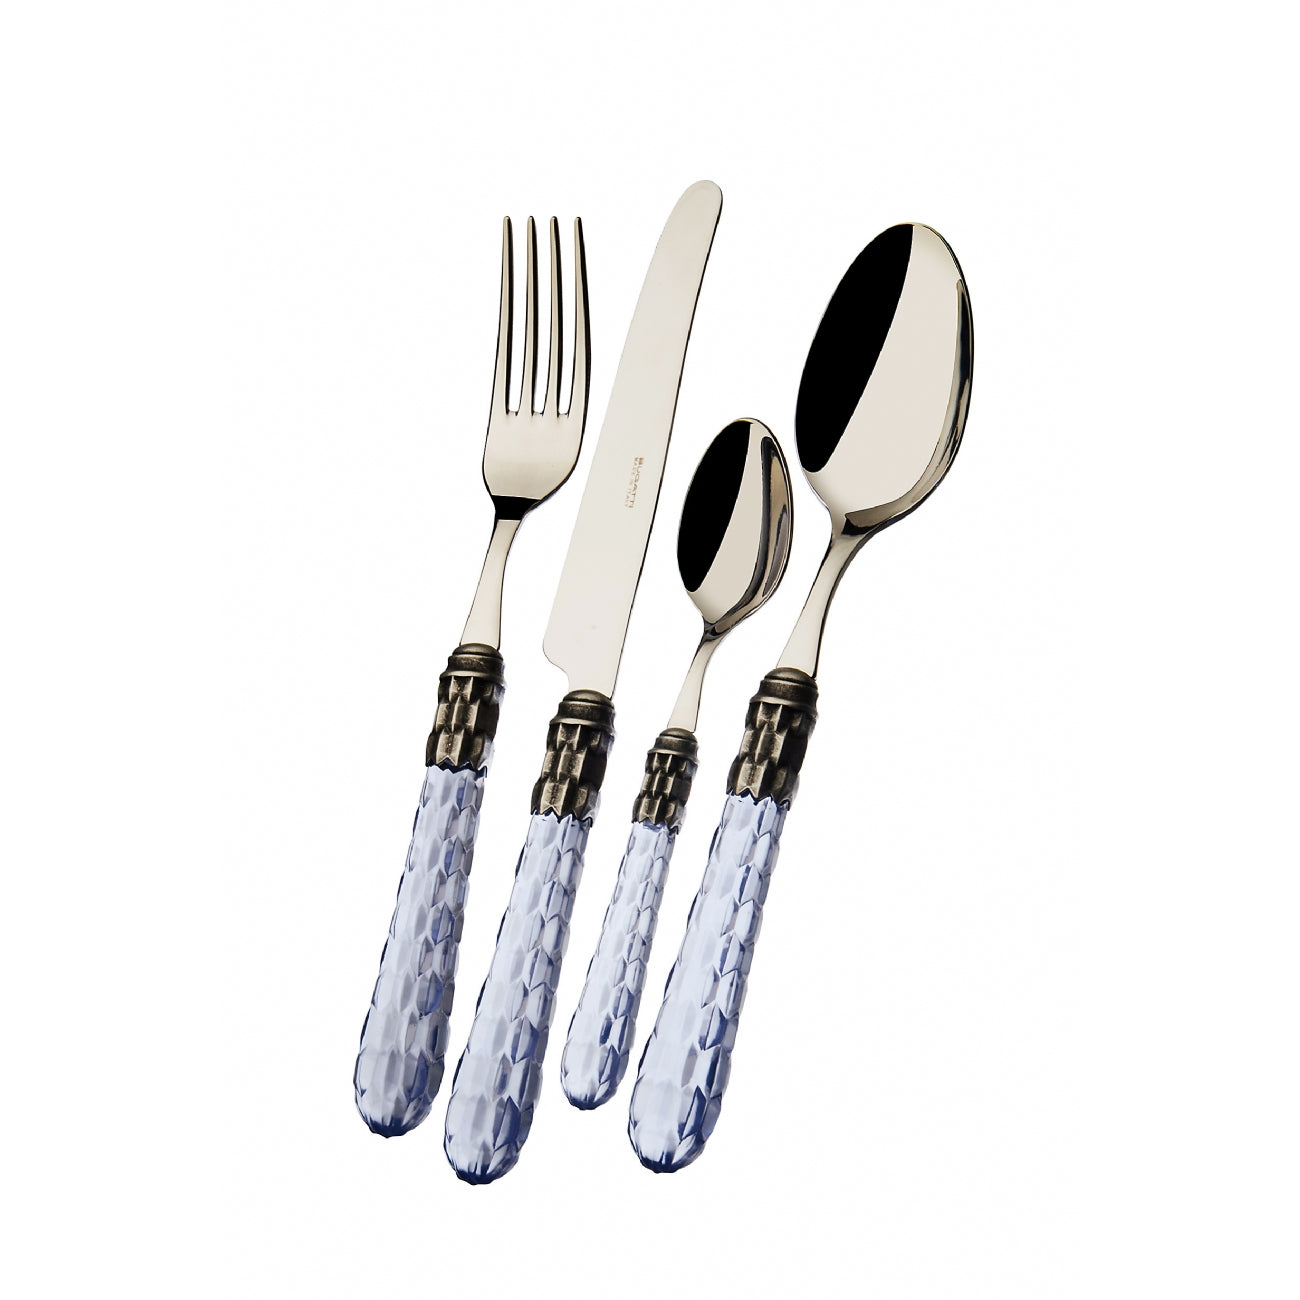 BUGATTI, Cristallo, 24-piece cutlery set in 18/10 stainless steel with antique silver ring and blue handle